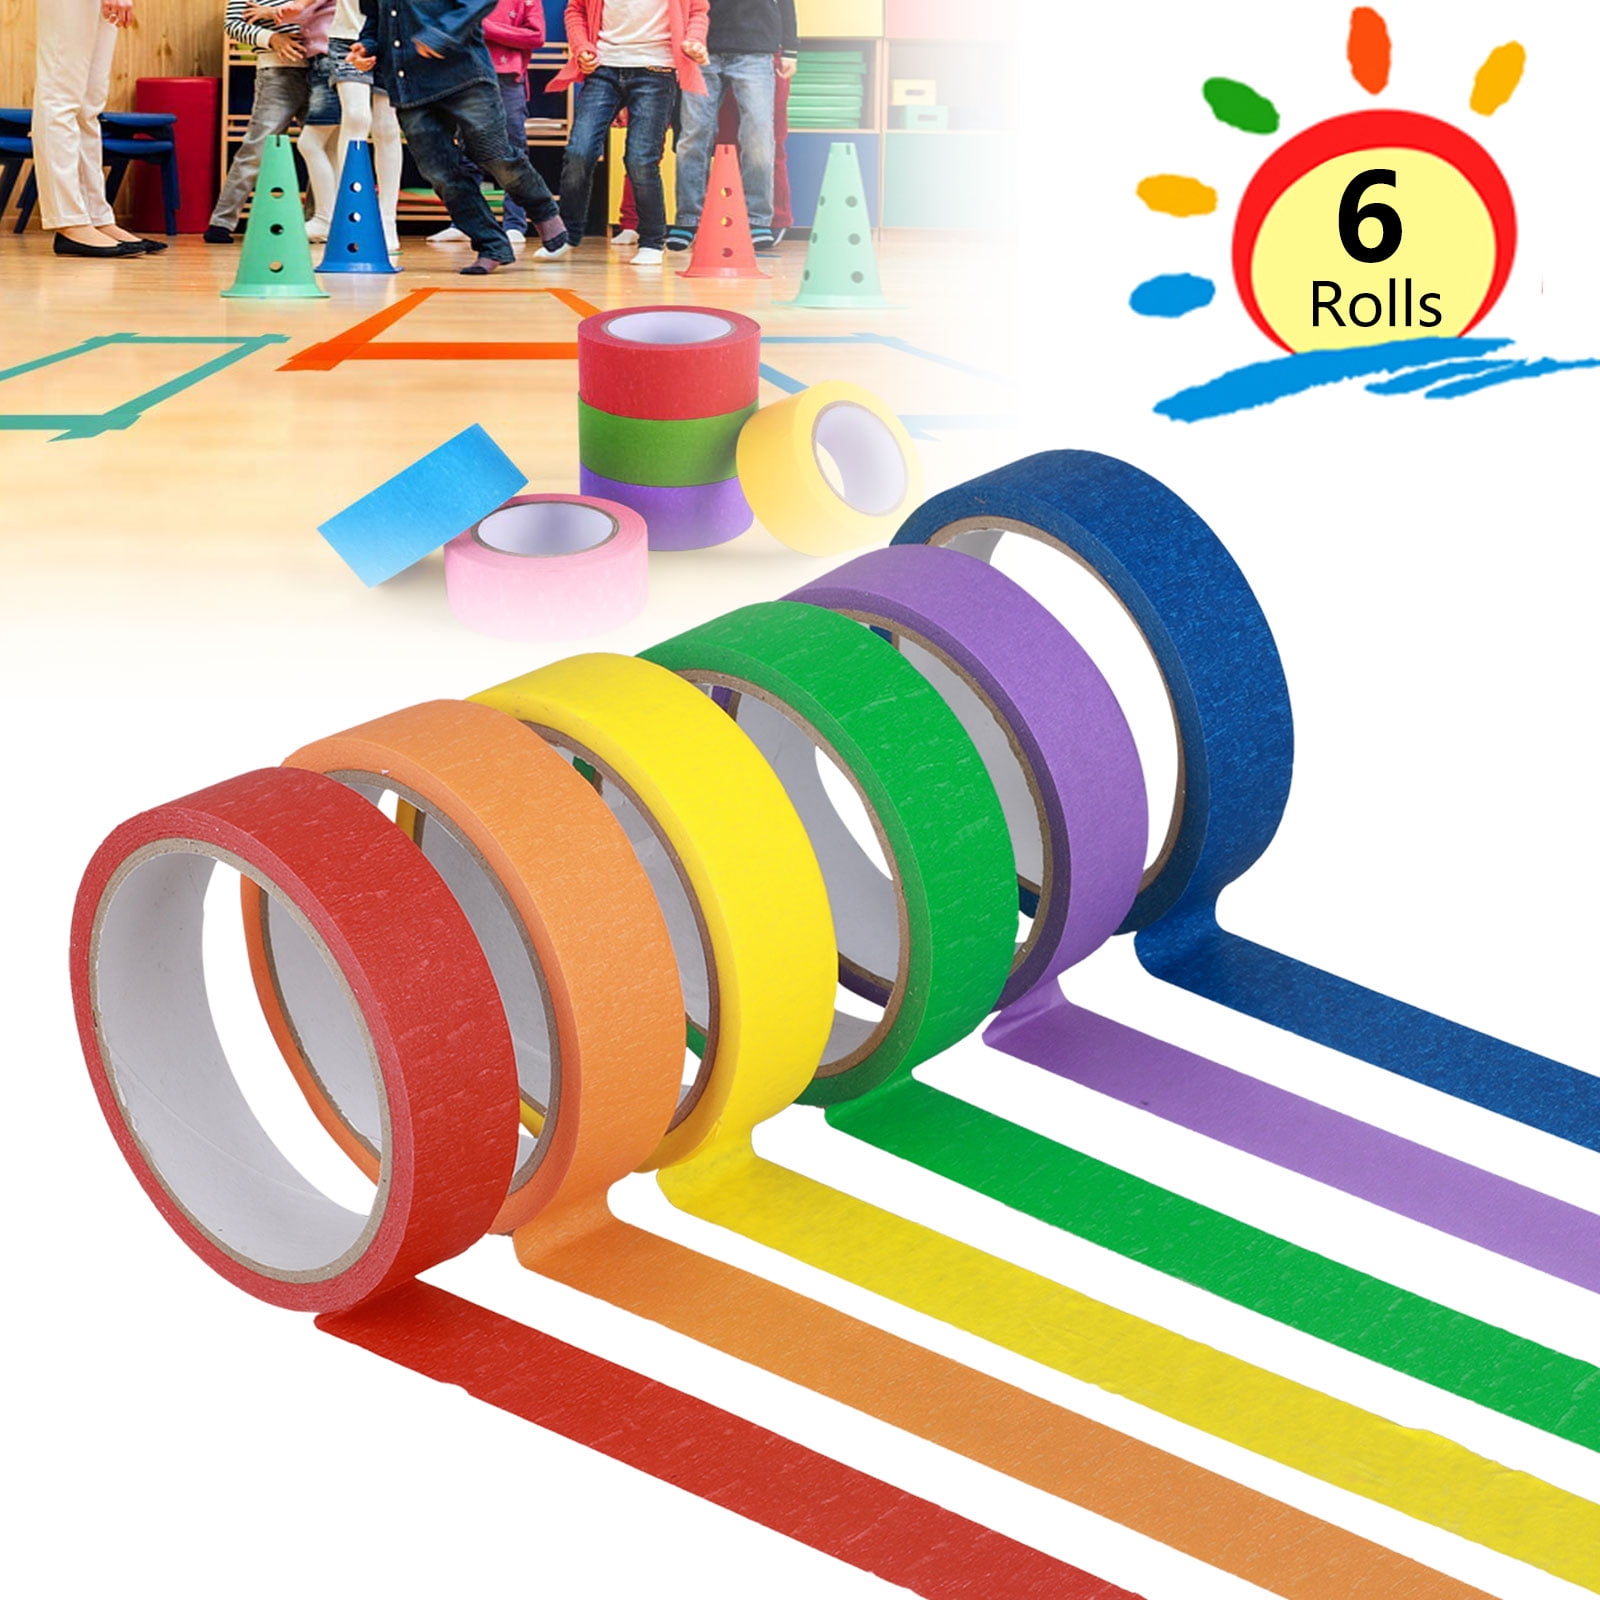 Colorations® 1 Colored Masking Tape Tapes Glue Arts & Crafts All Categories